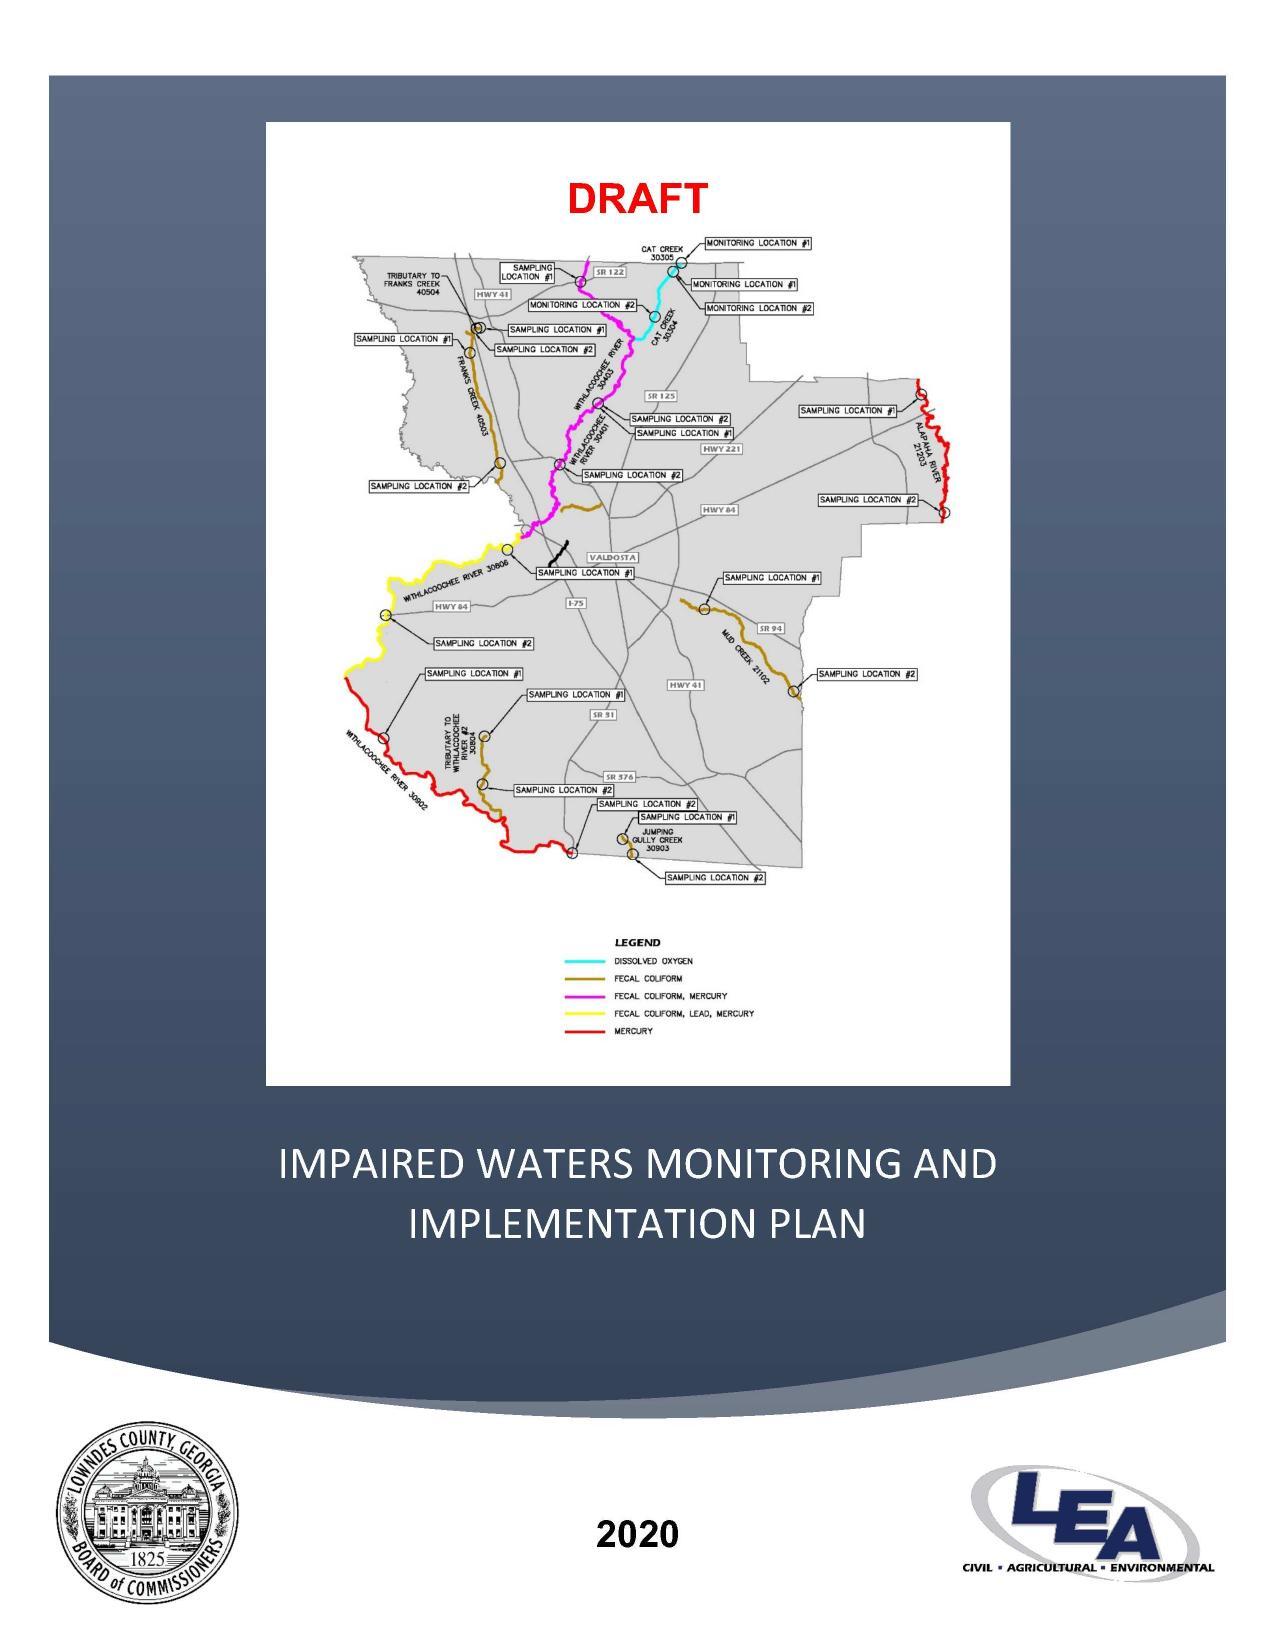 IMPAIRED WATERS MONITORING AND IMPLEMENTATION PLAN